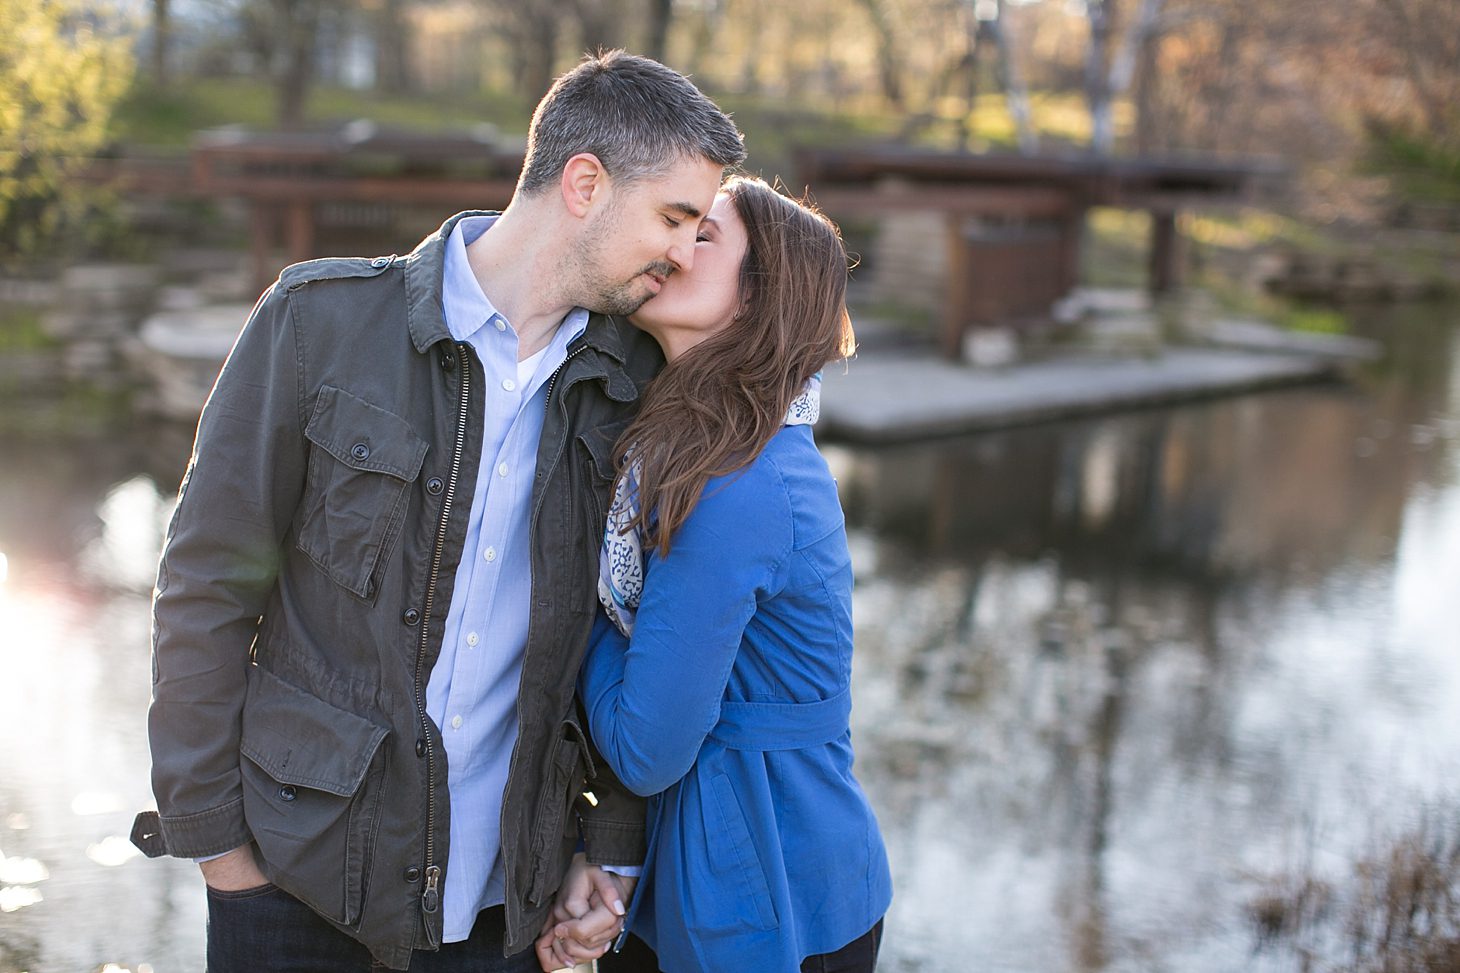 lily-pond-chicago-engagement-photos_0007